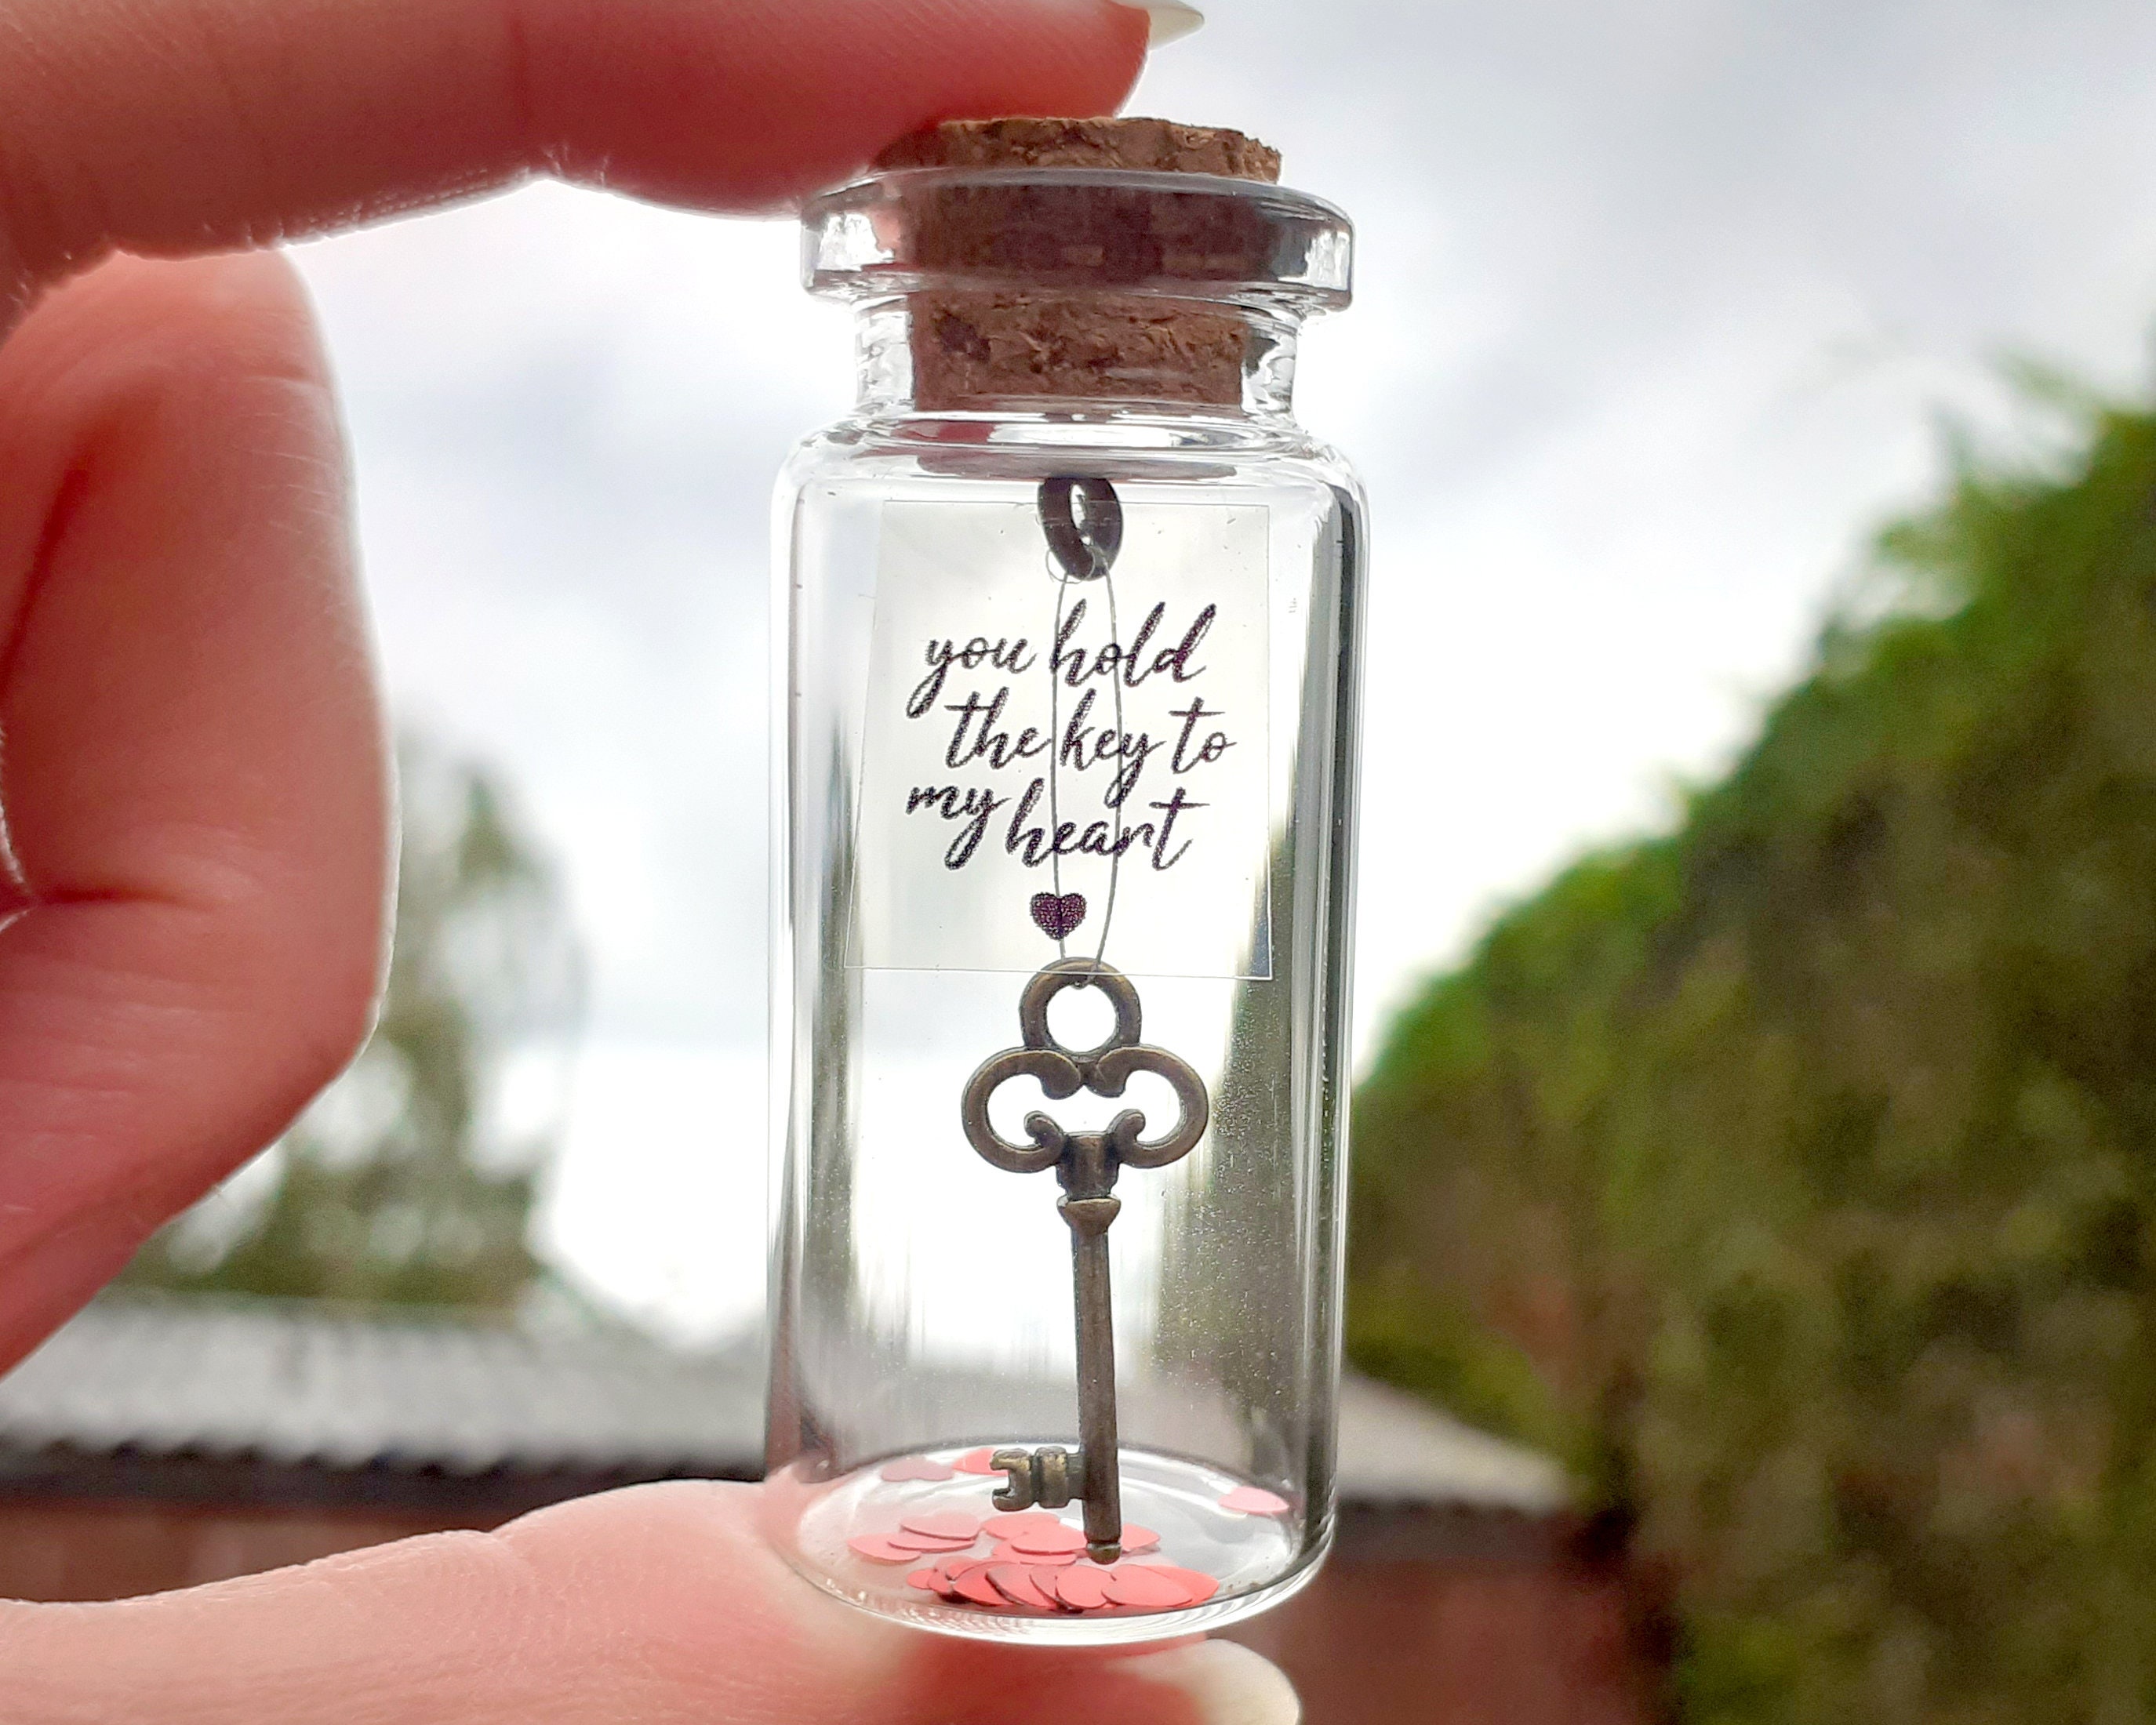 You Hold The Key to My Heart Wish Jar with a Card for Husband or Wife Romantic Message in a Bottle to Give Boyfriend or Girlfriend Key in a bottle, You Hold The Key to My Heart